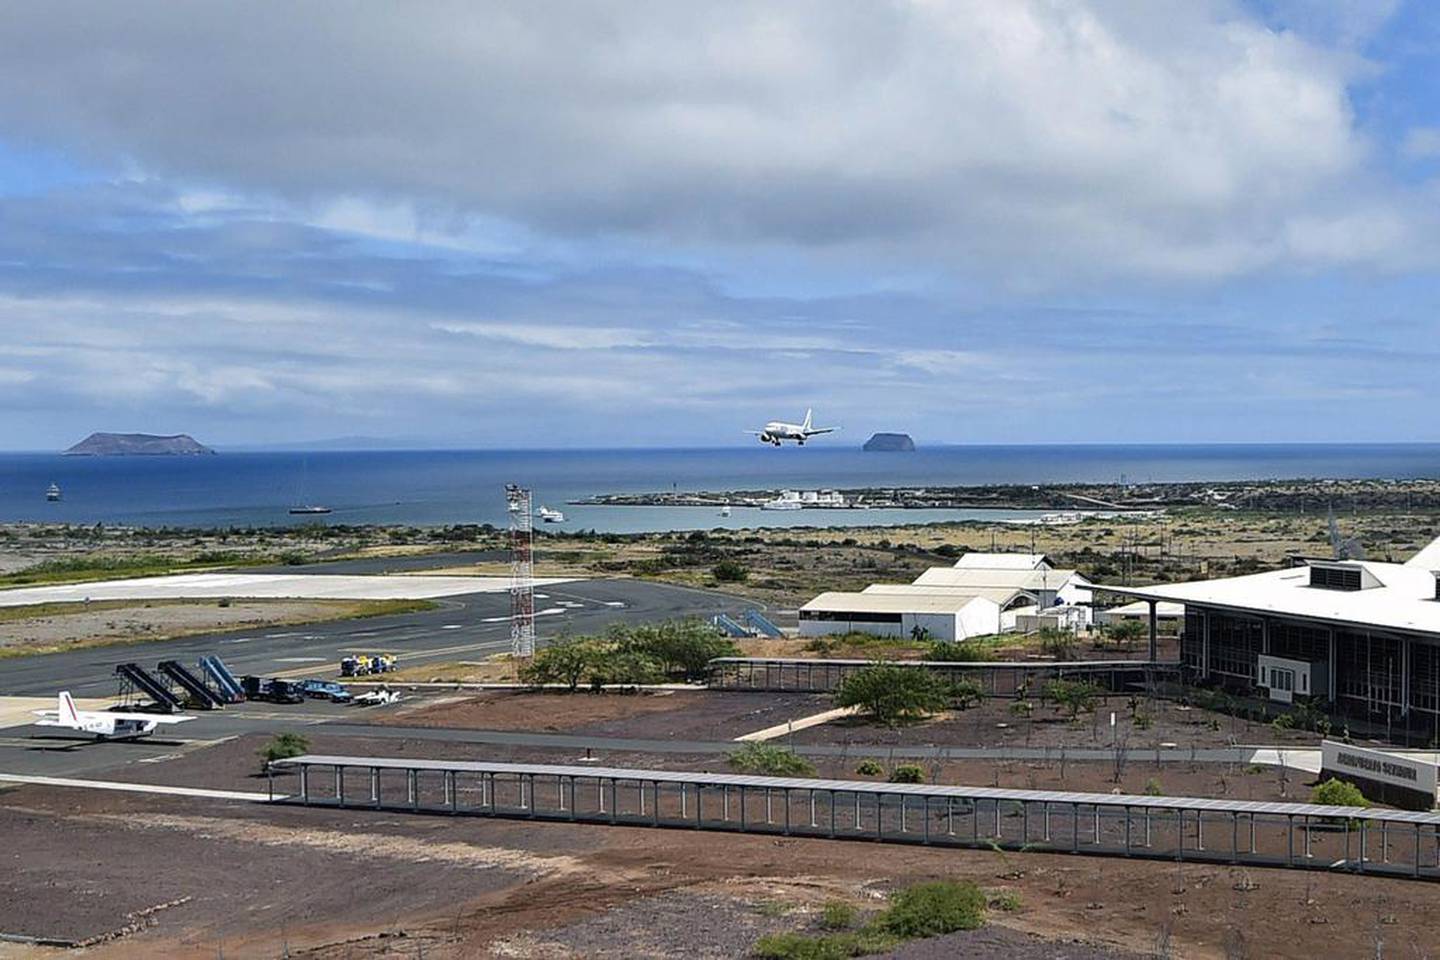 This airport in the Galapagos is the world's first ecological airport. AFP